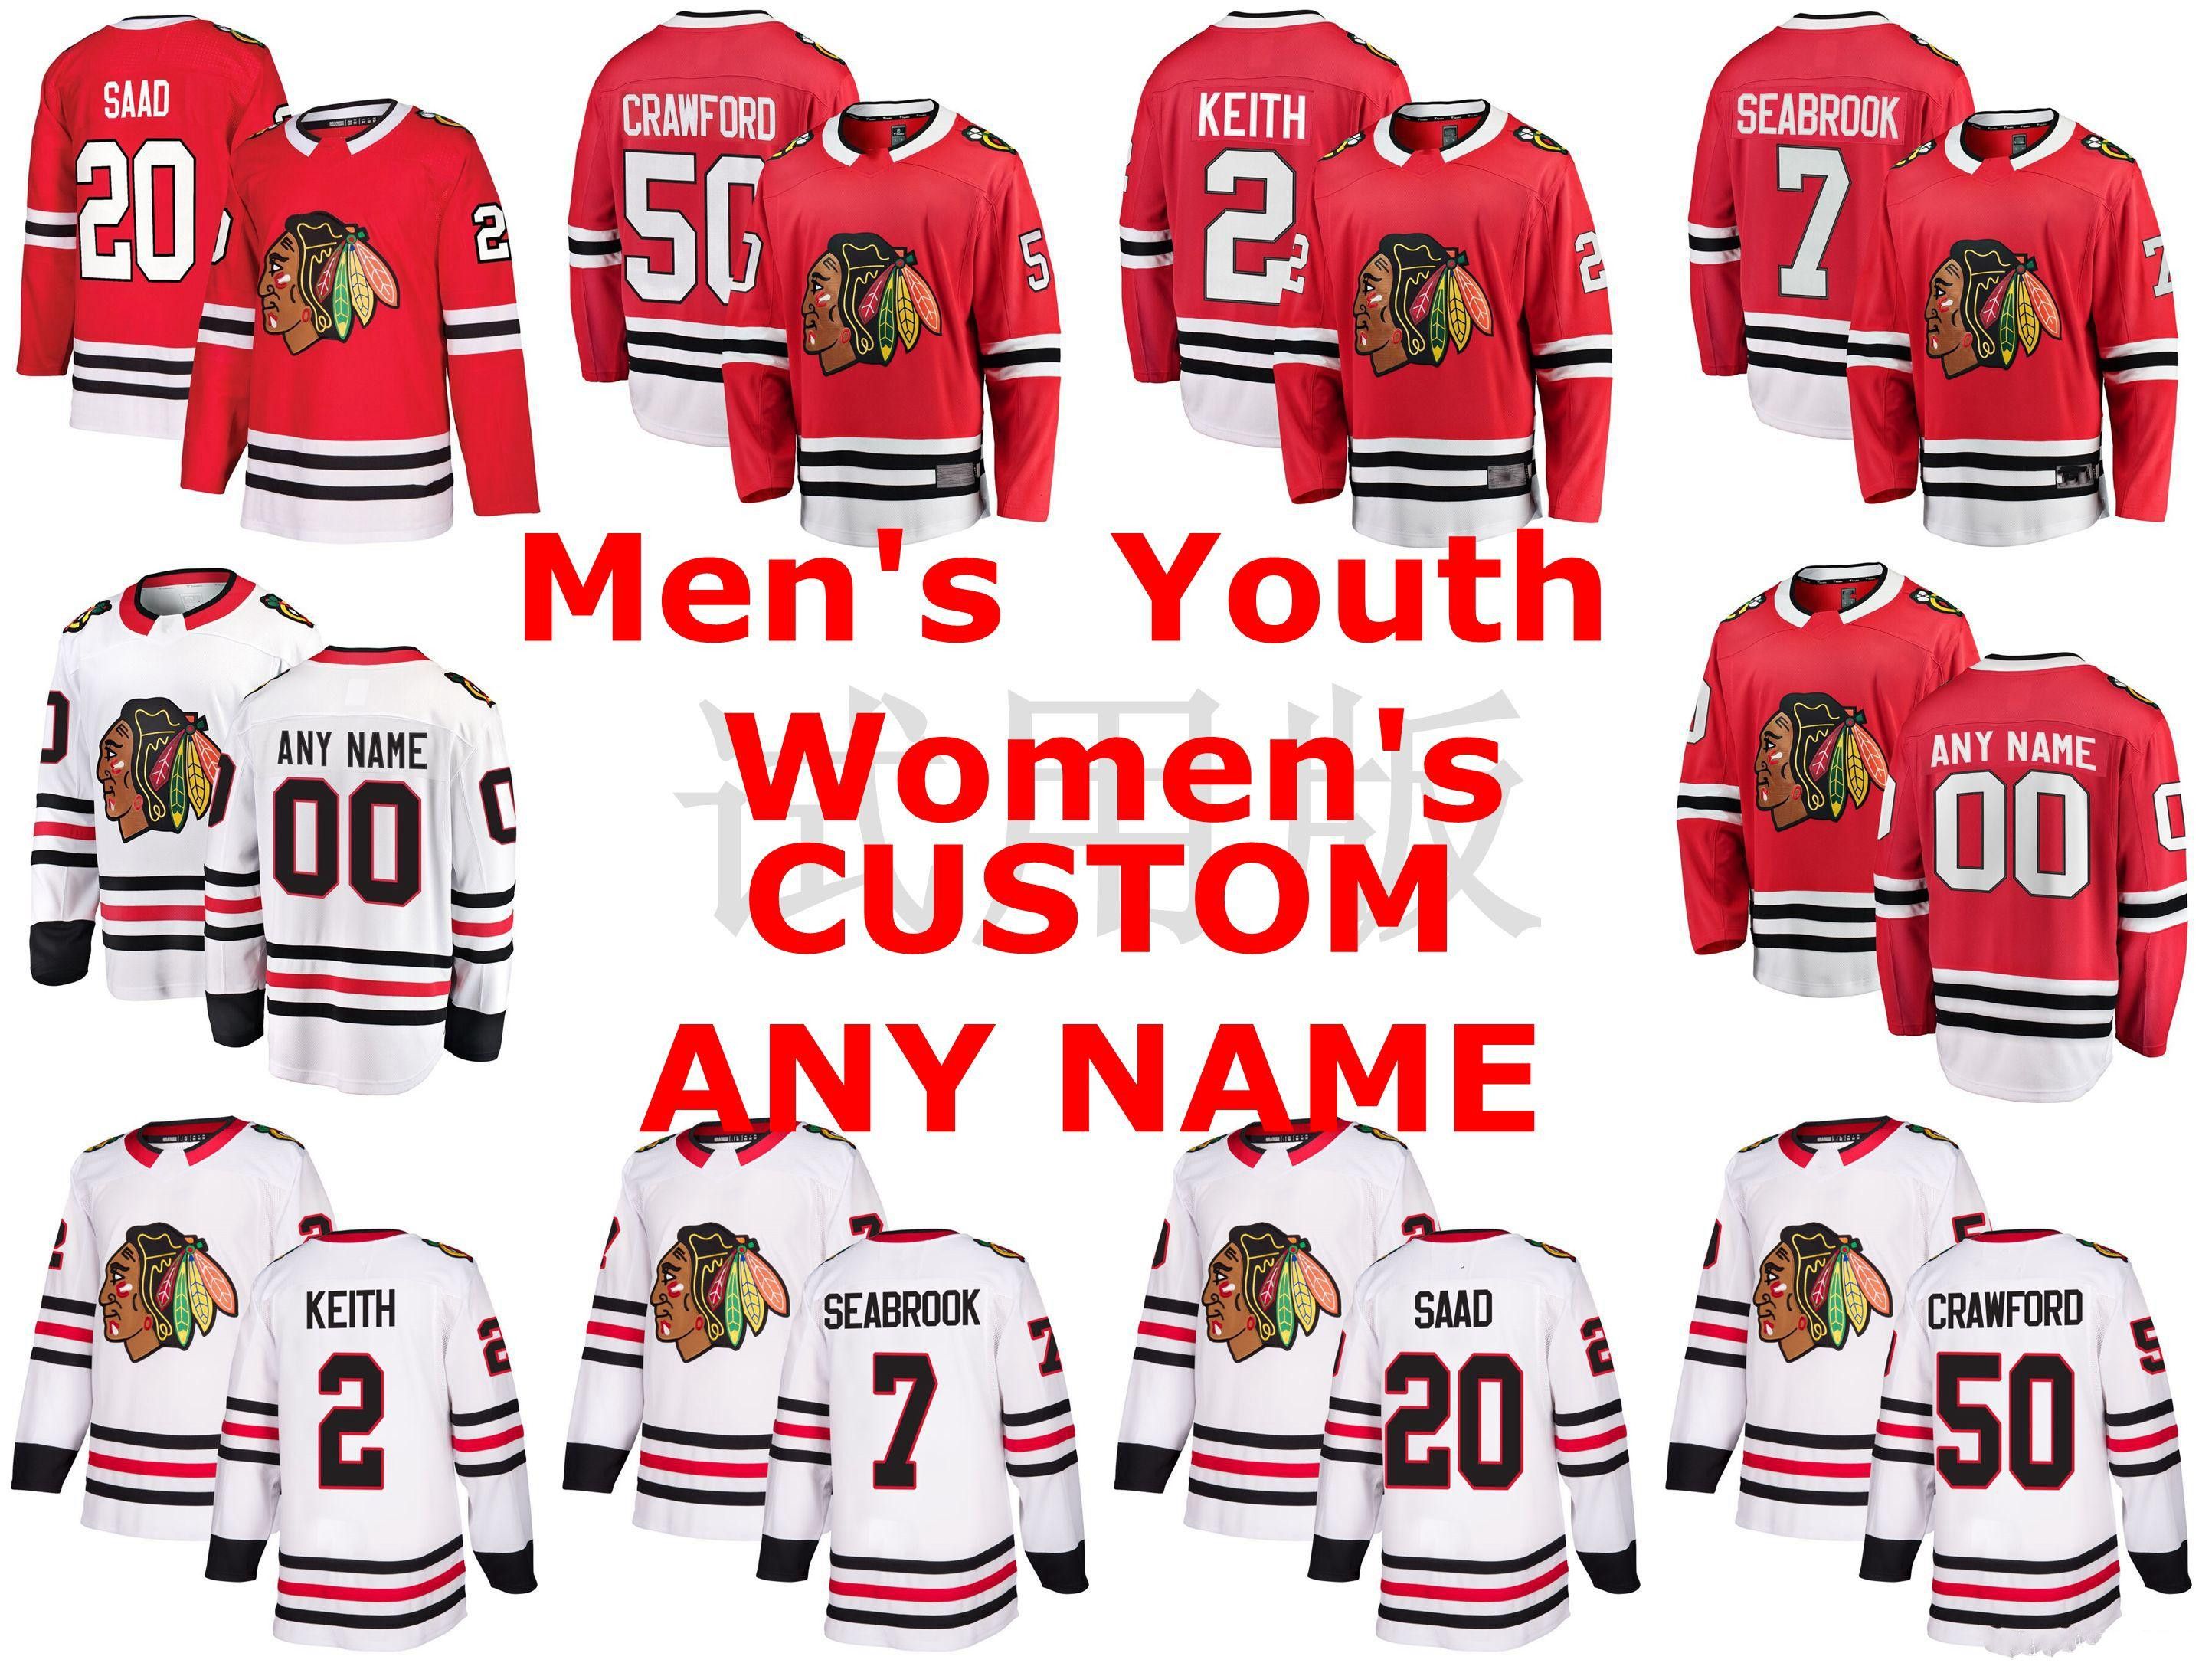 cheap duncan keith jersey